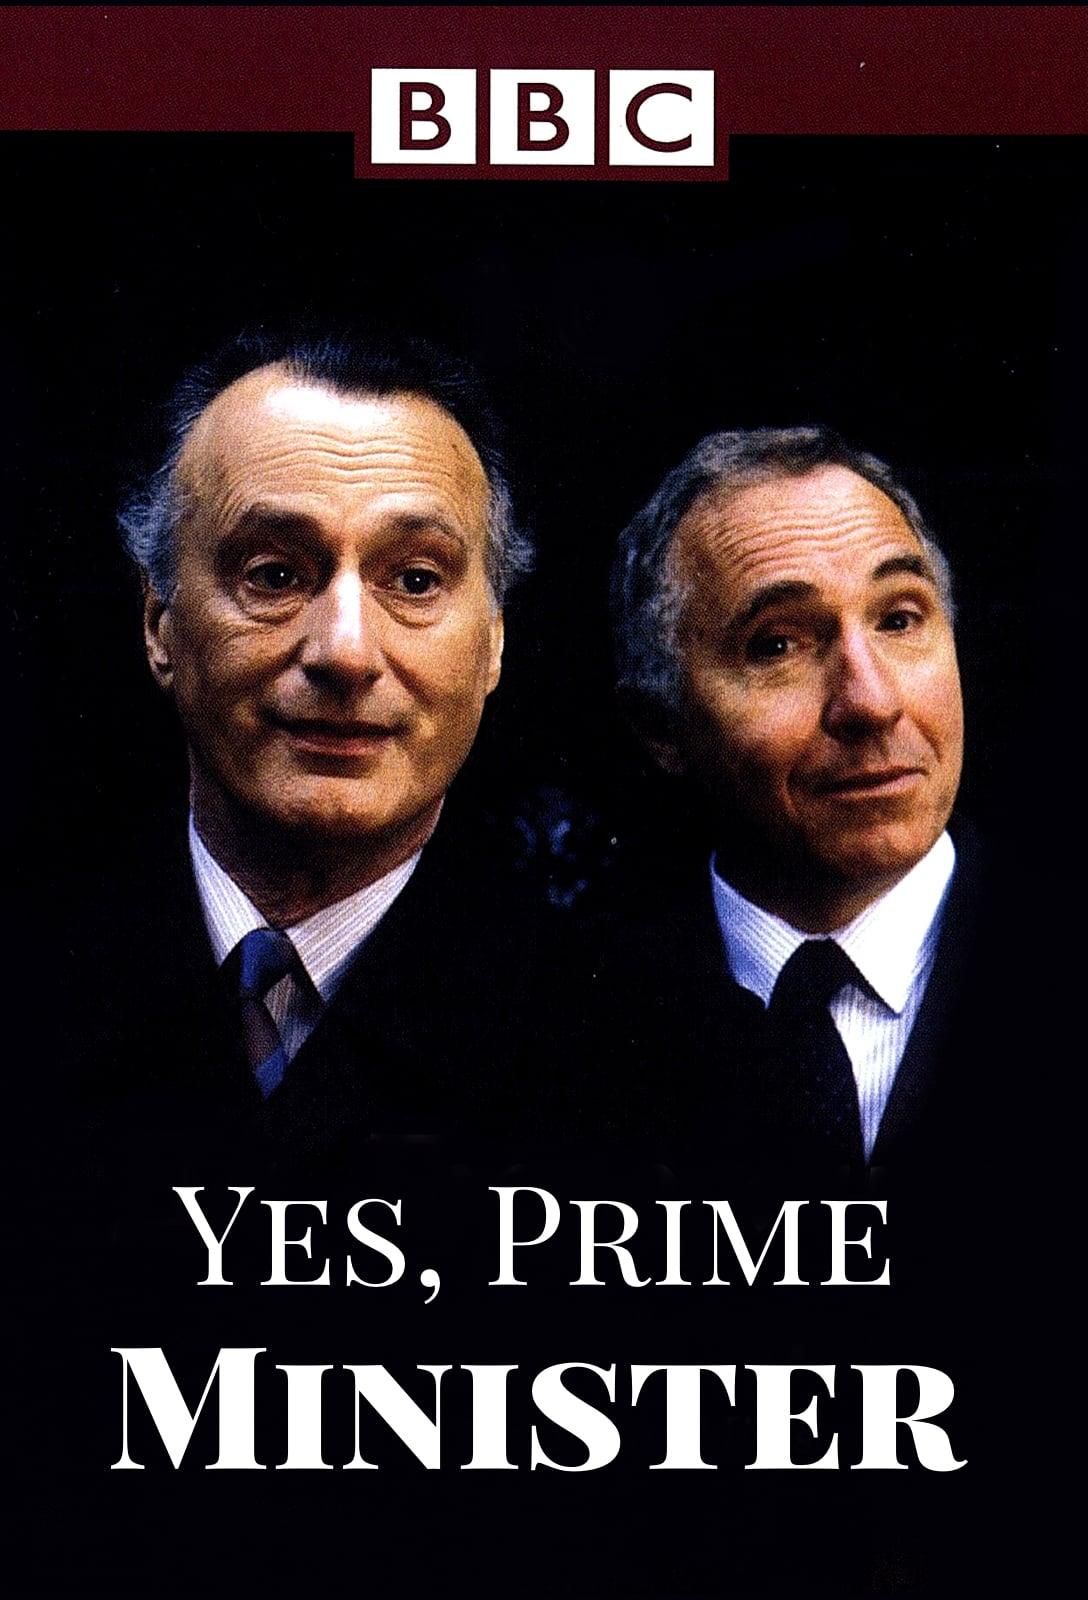 Yes, Prime Minister poster